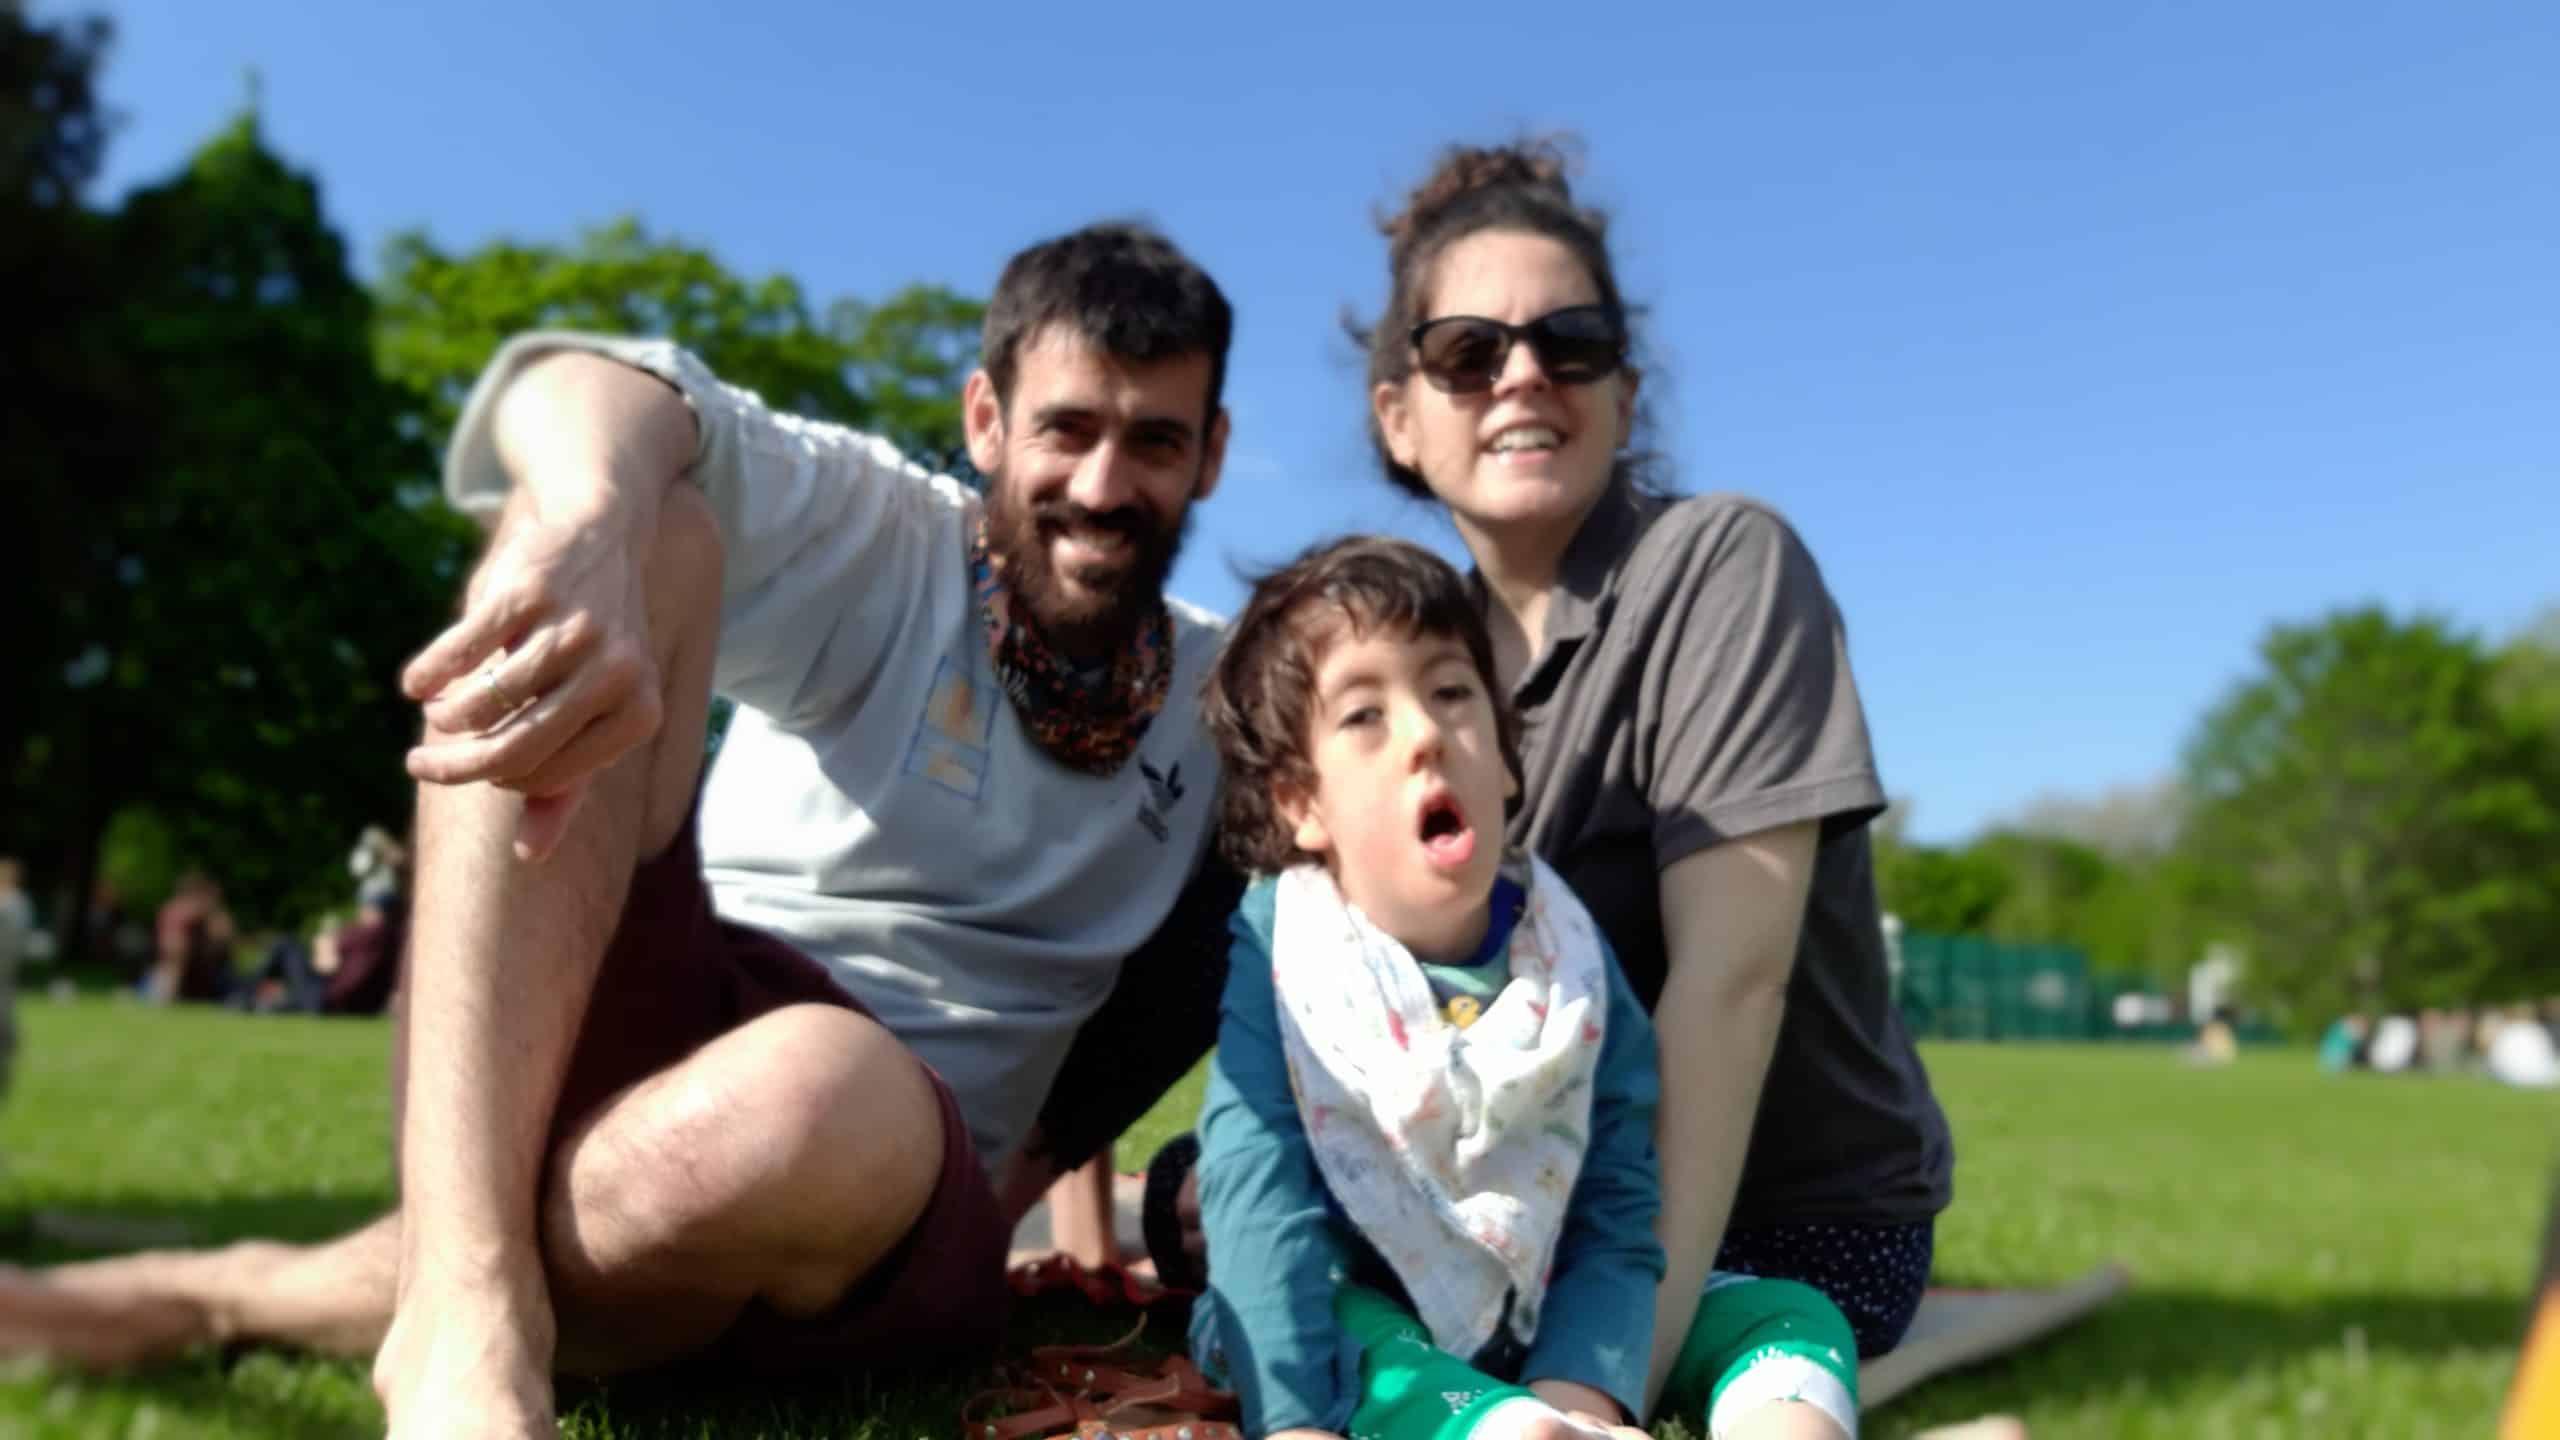 Noam, who has a condition that often needs treating at Evelina London, with his parents Willian and Vanina